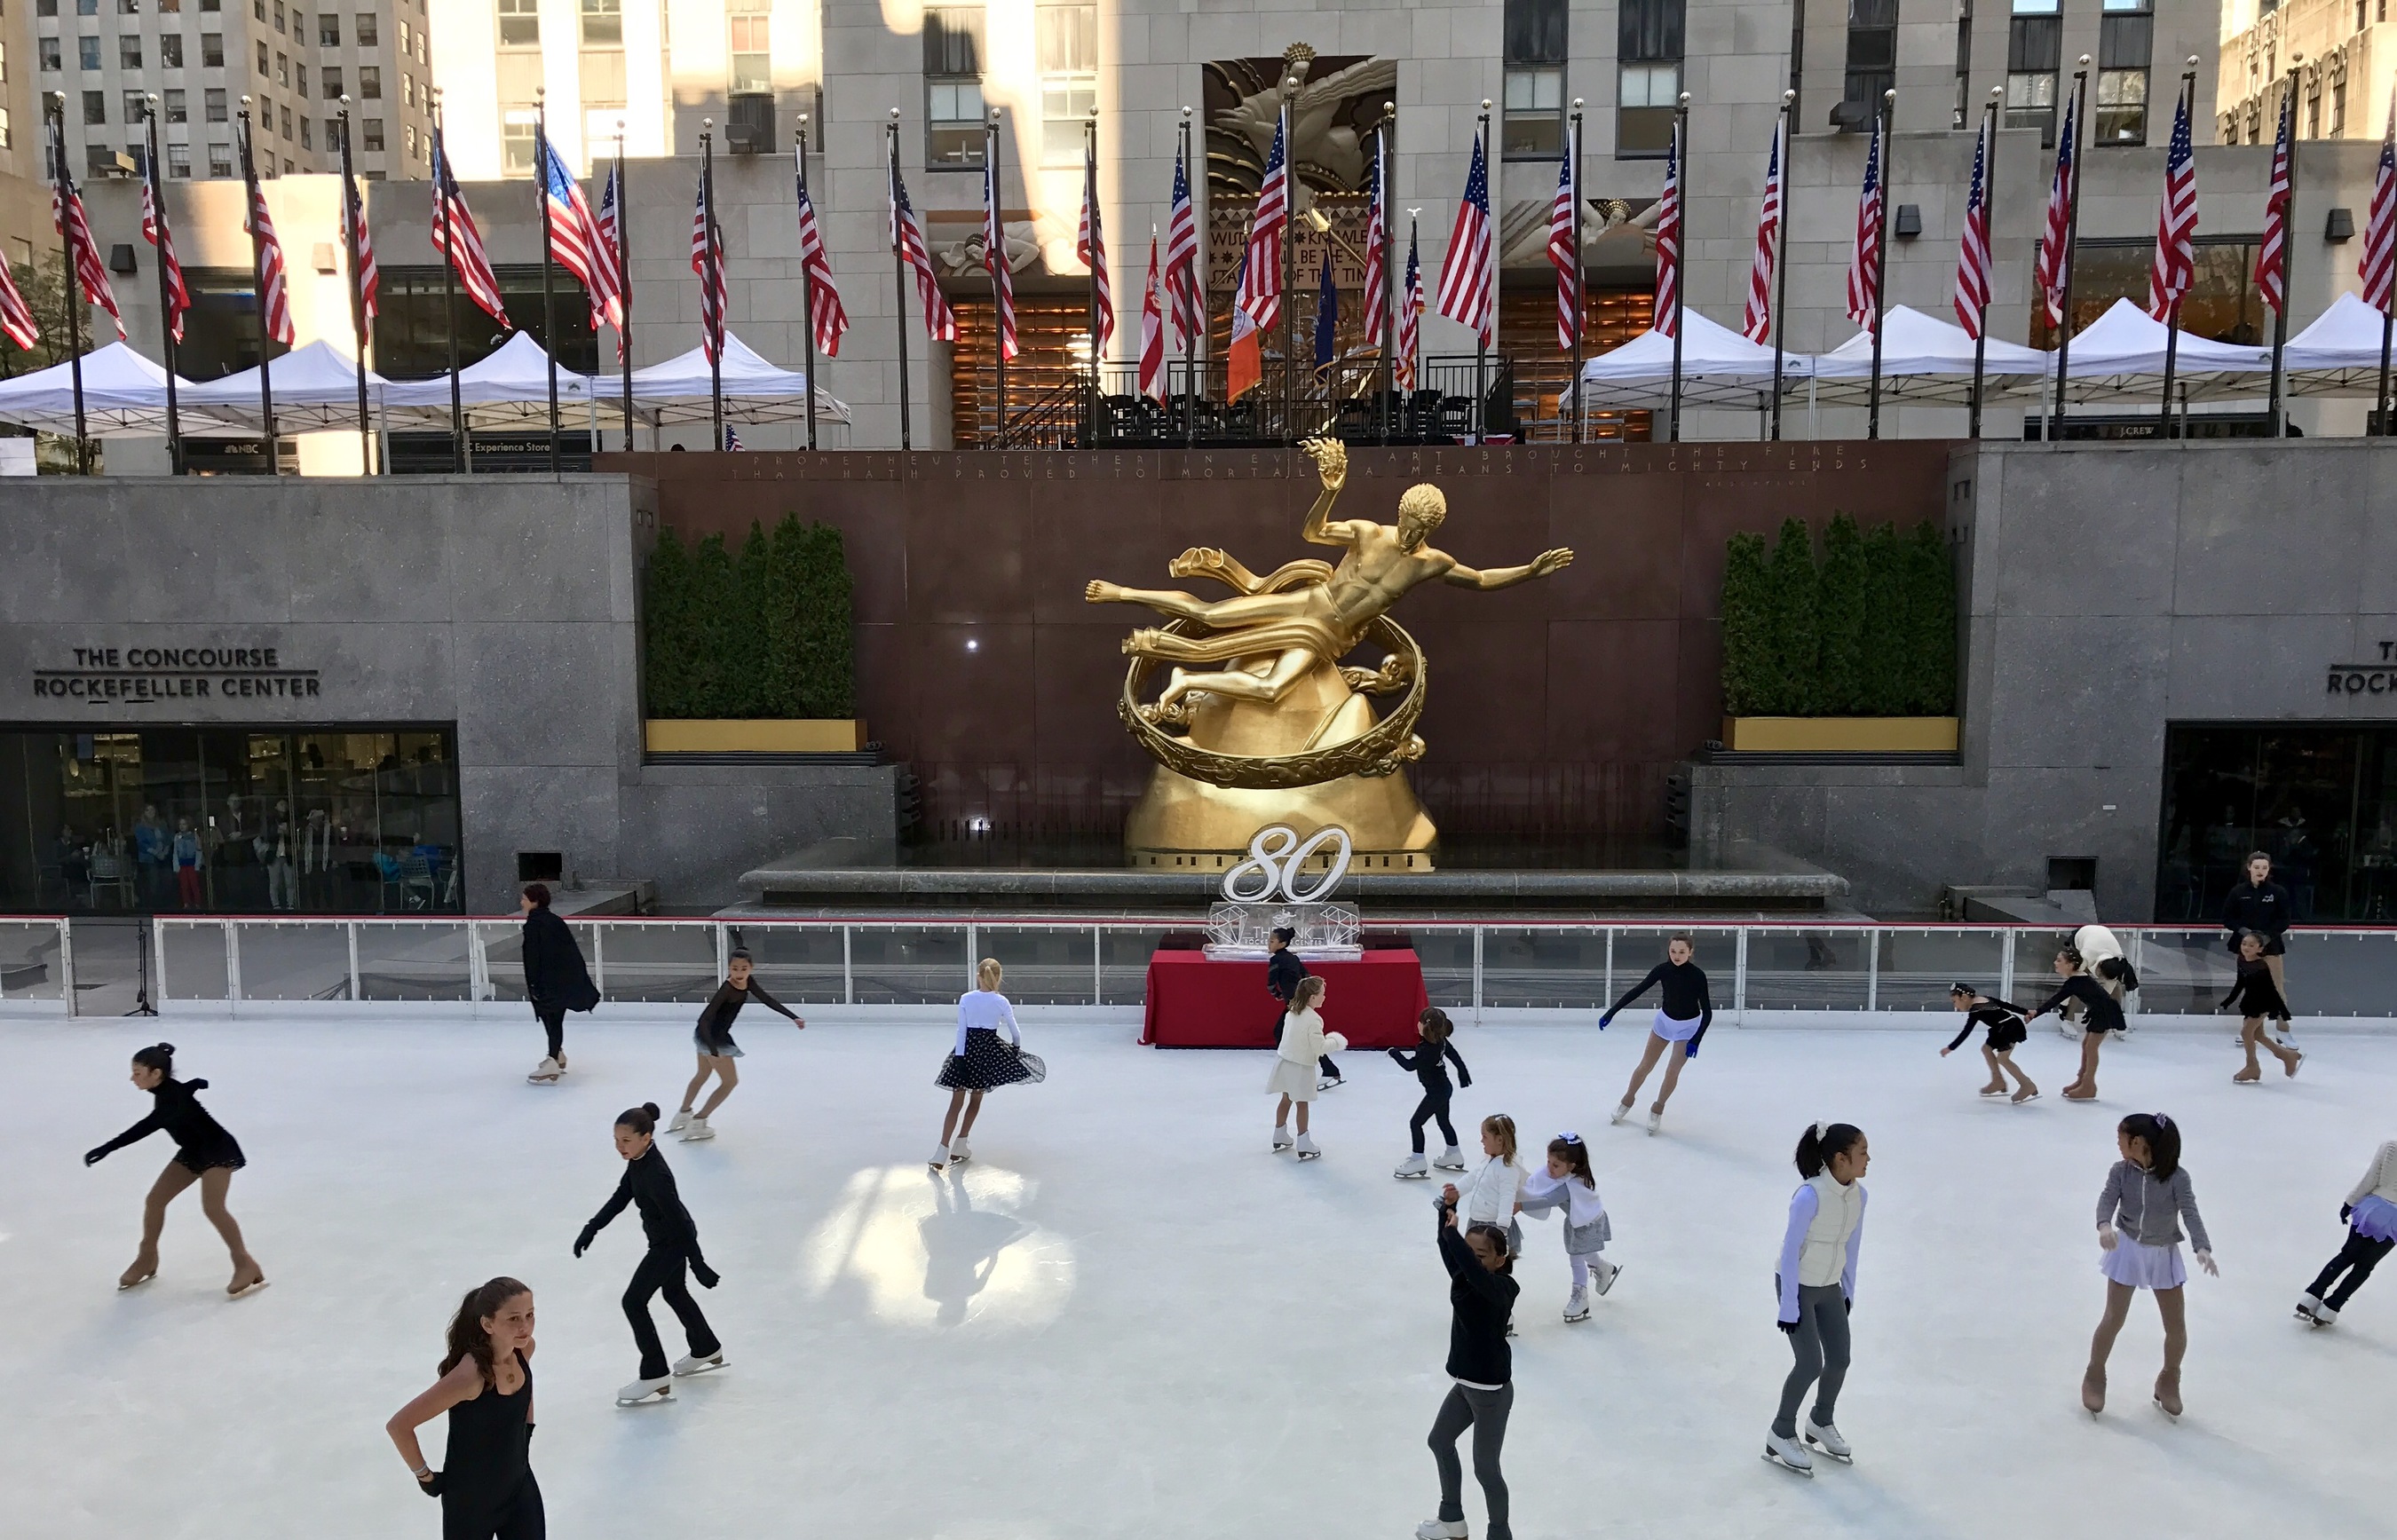 Young skaters take the ice during the official first skate at The Rink at Rockefeller Center on October 11, 2016. The Rink celebrates its 80th anniversary season this year. (Photo credit: Rick Ho)